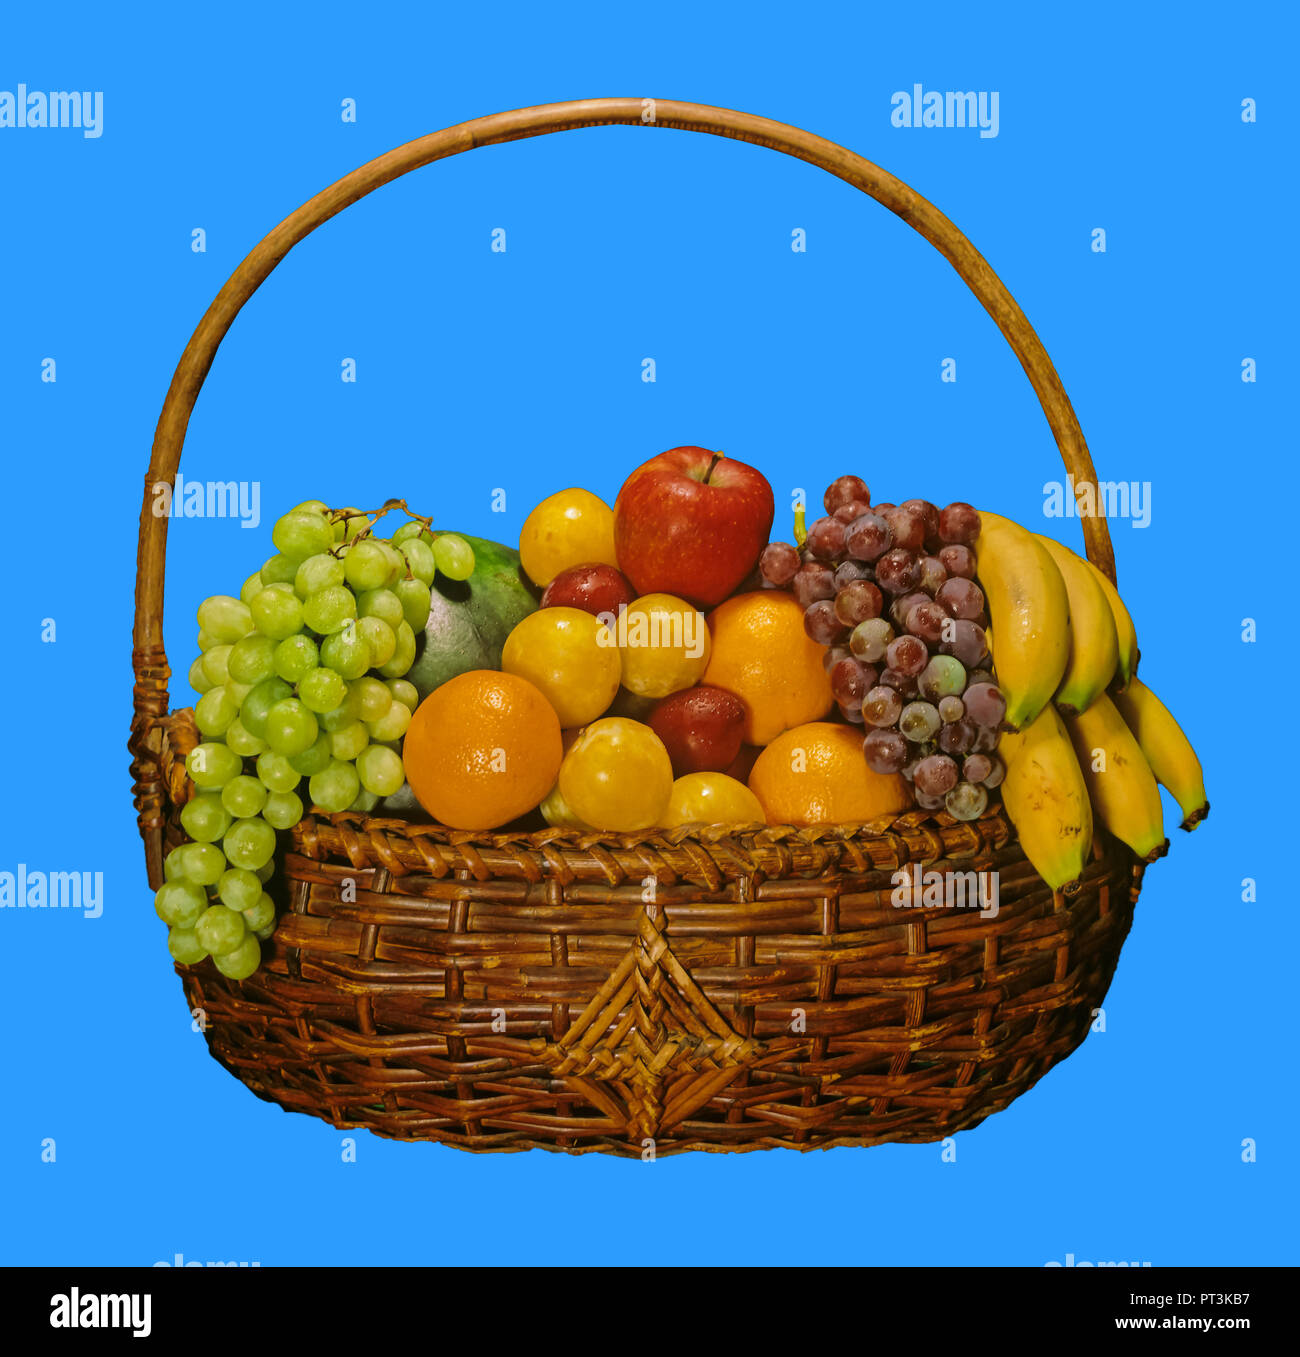 Basket with fruits. Spain. Europe Stock Photo